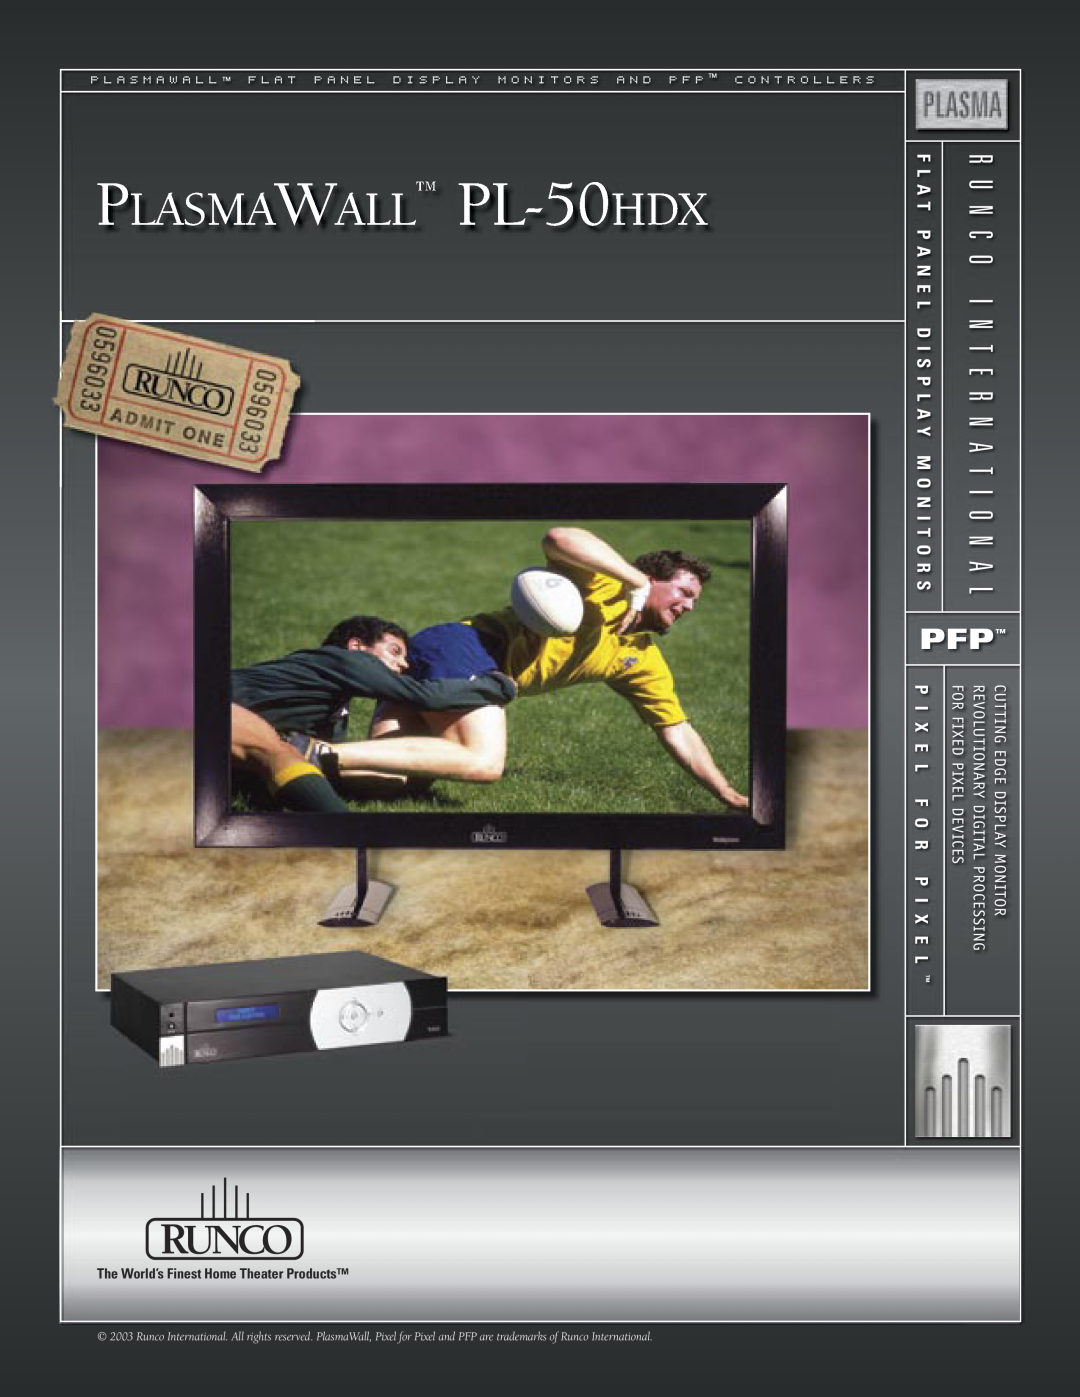 Runco manual PLASMAWALL PL-50HDX, P I X E L F O R P I X E, N E L, The World’s Finest Home Theater Products 